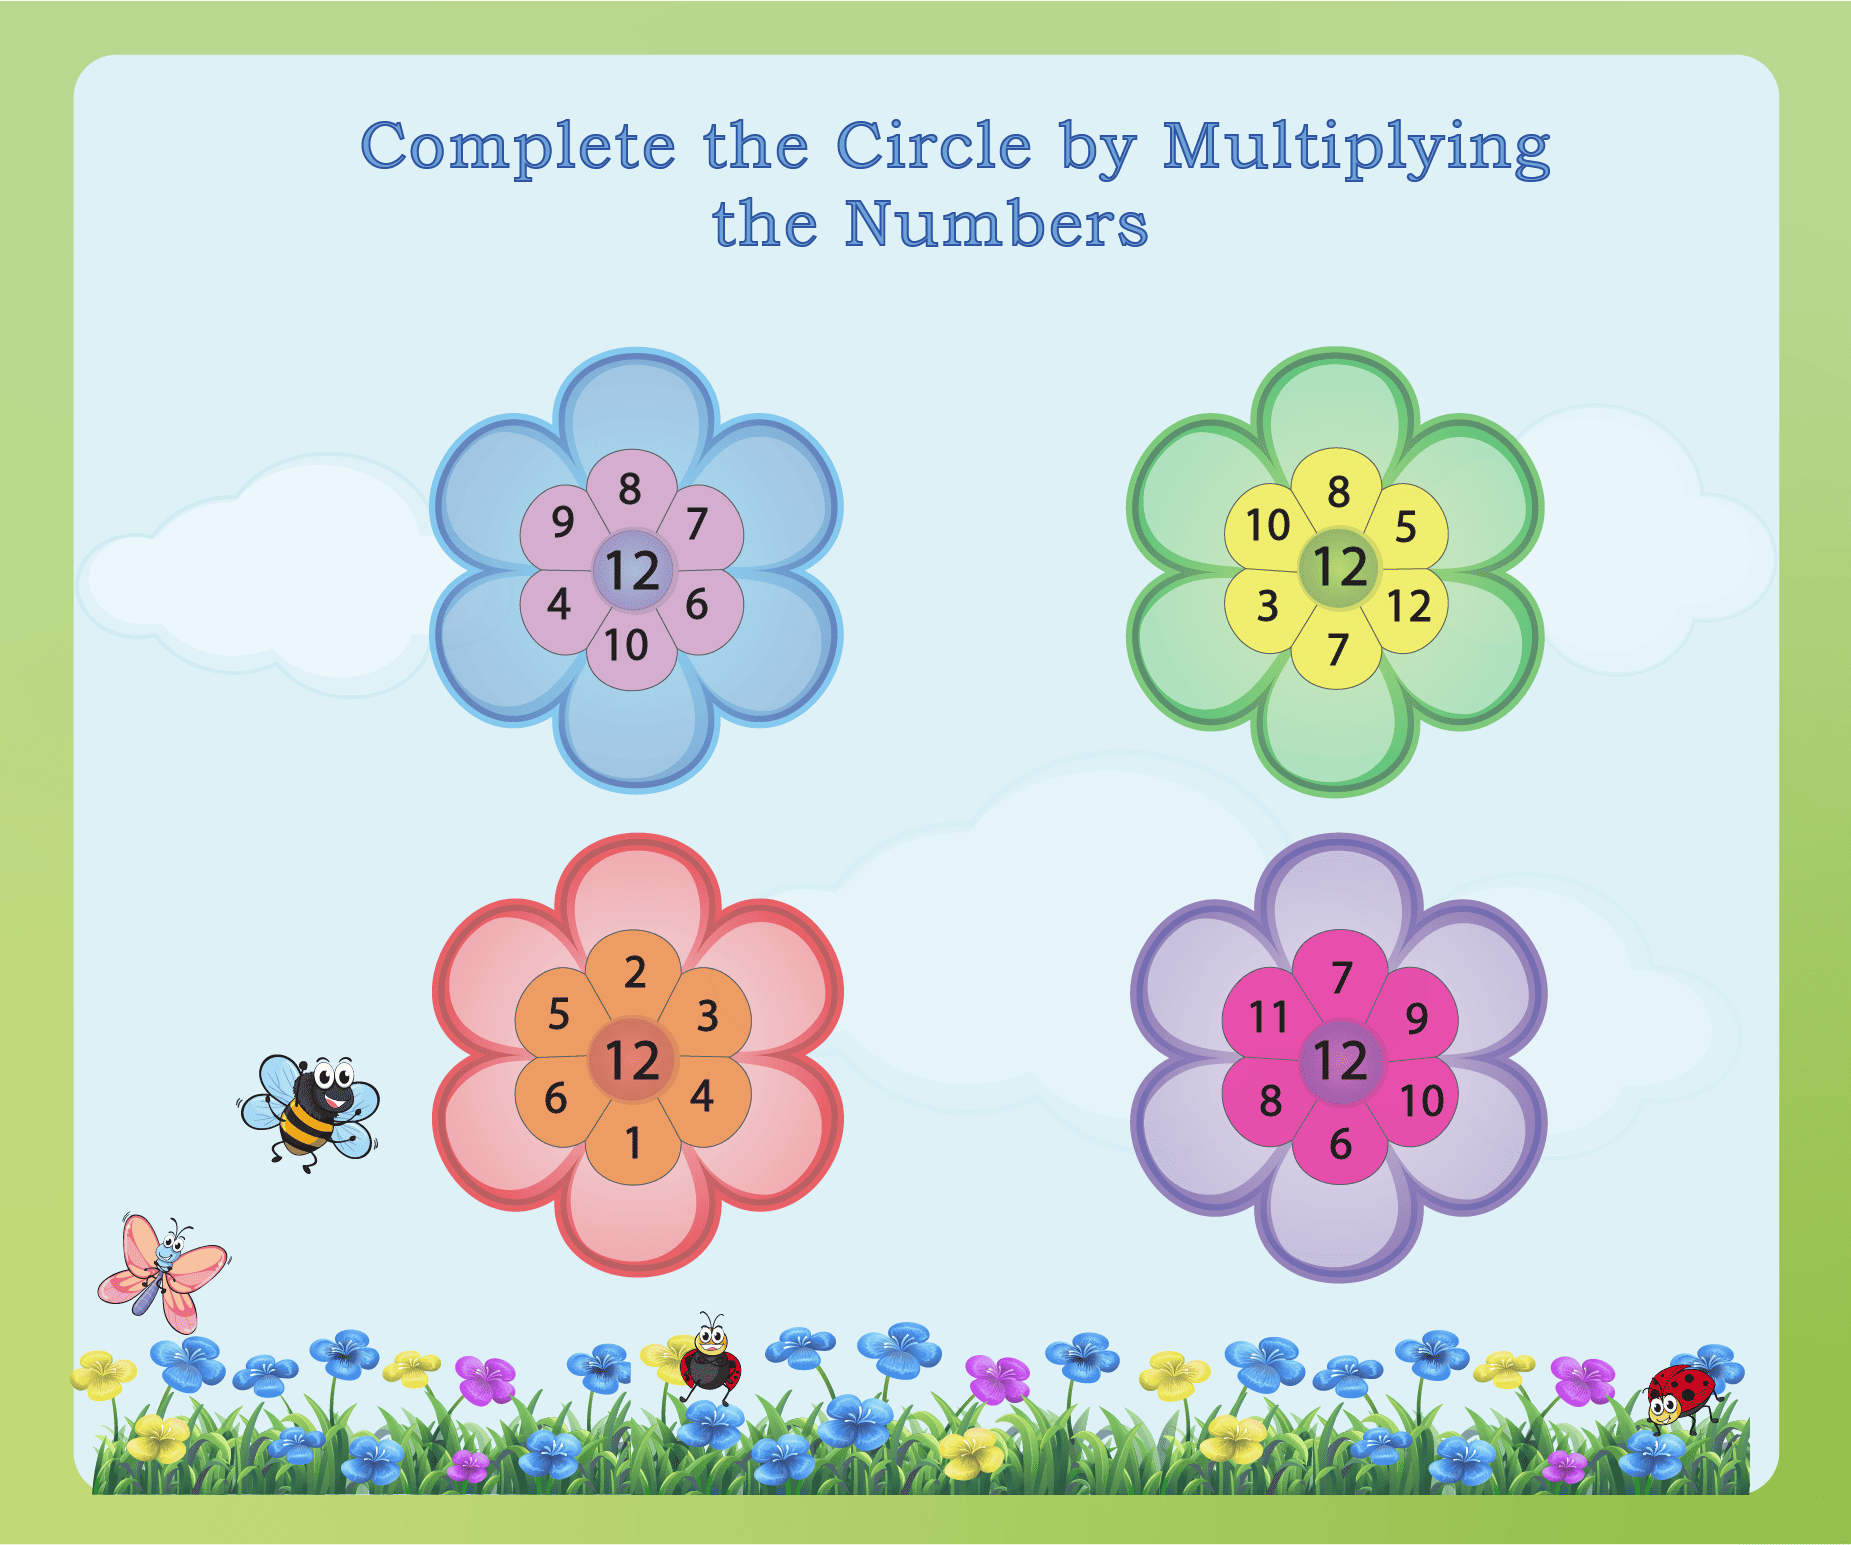 Complete the Circle in 12 times table worksheets